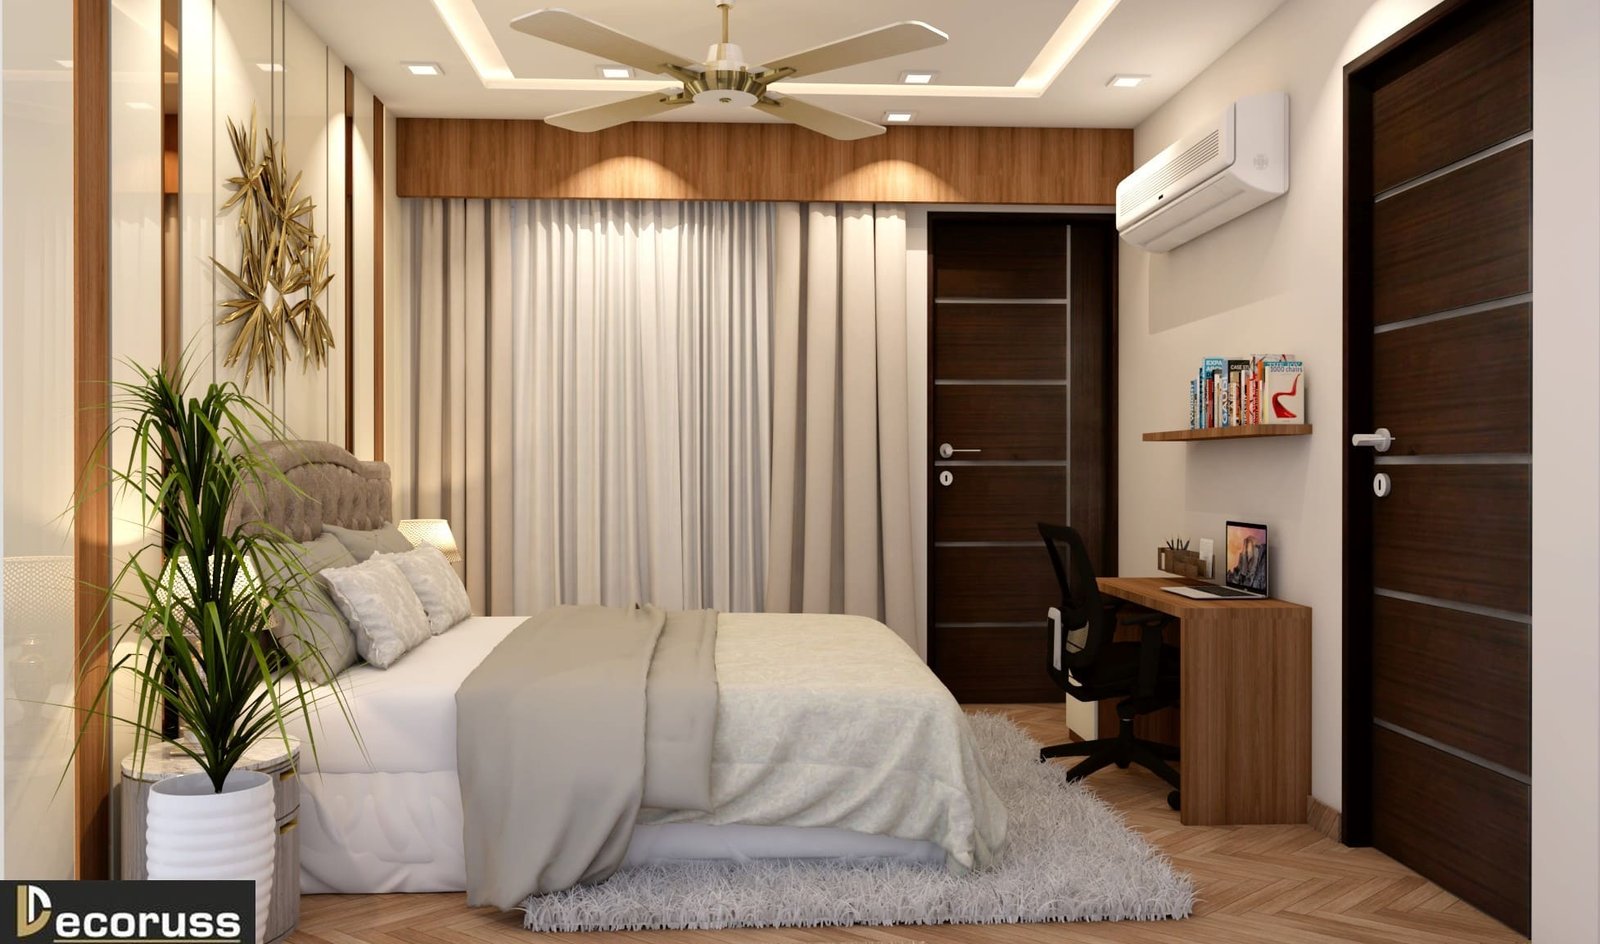 Why choosing a reliable home interior decorator in Lucknow is highly recommended?